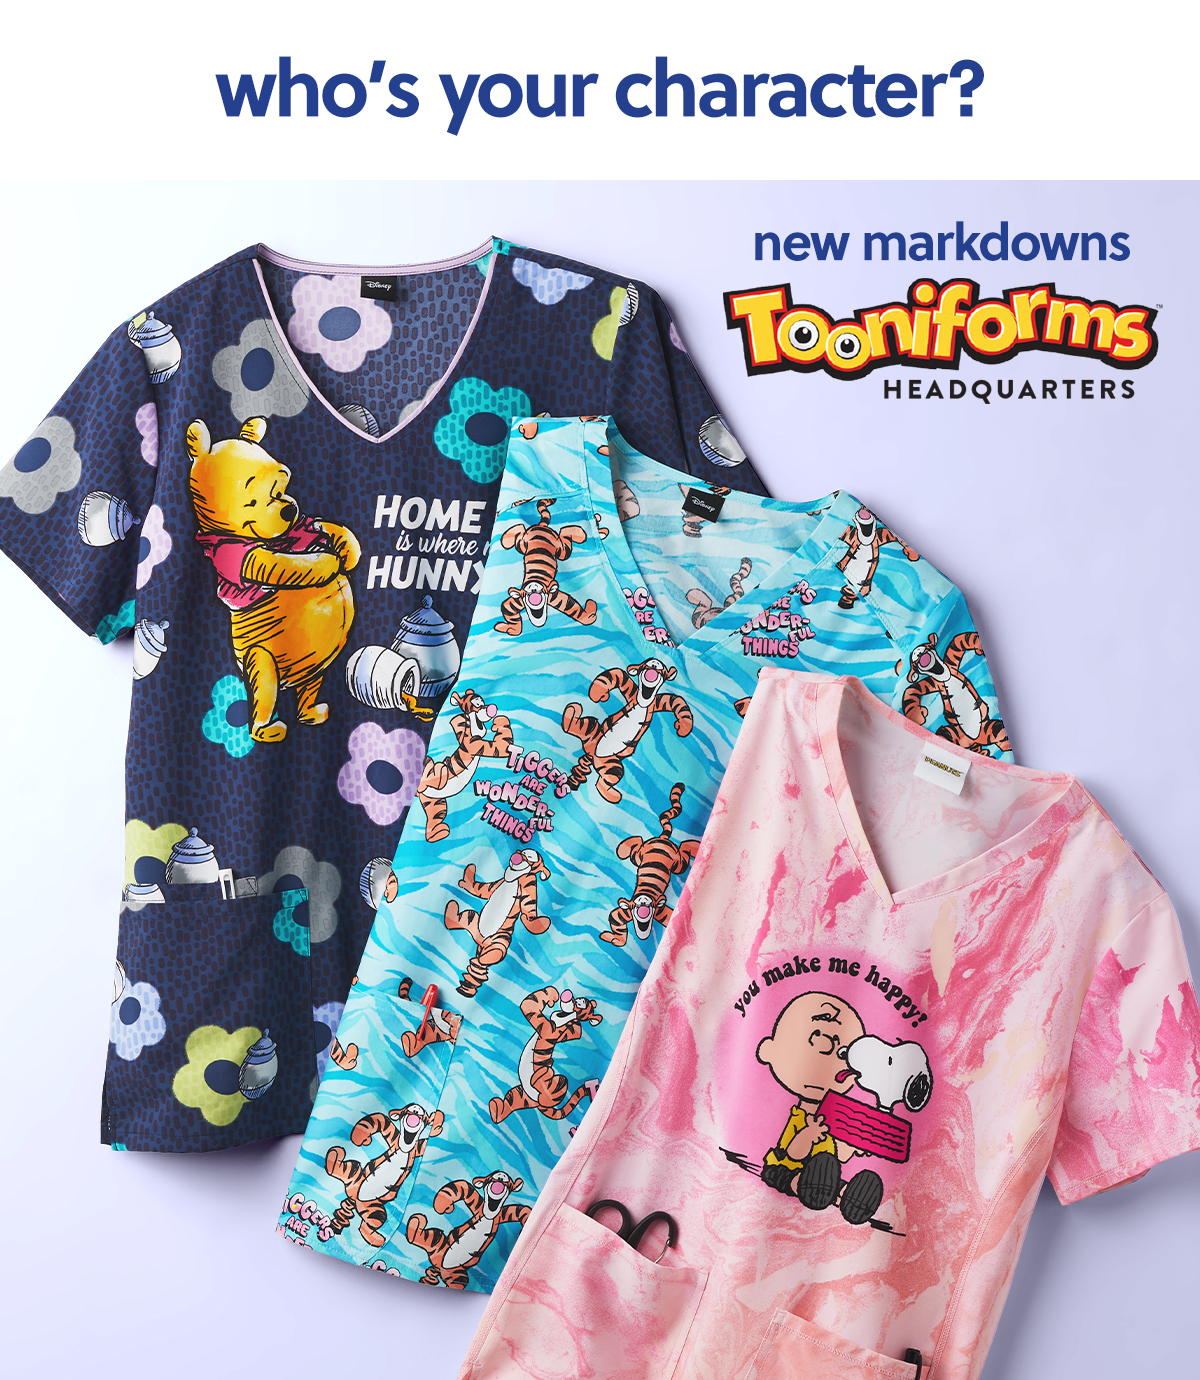 who's your character? new markdowns HEADQUARTERS 